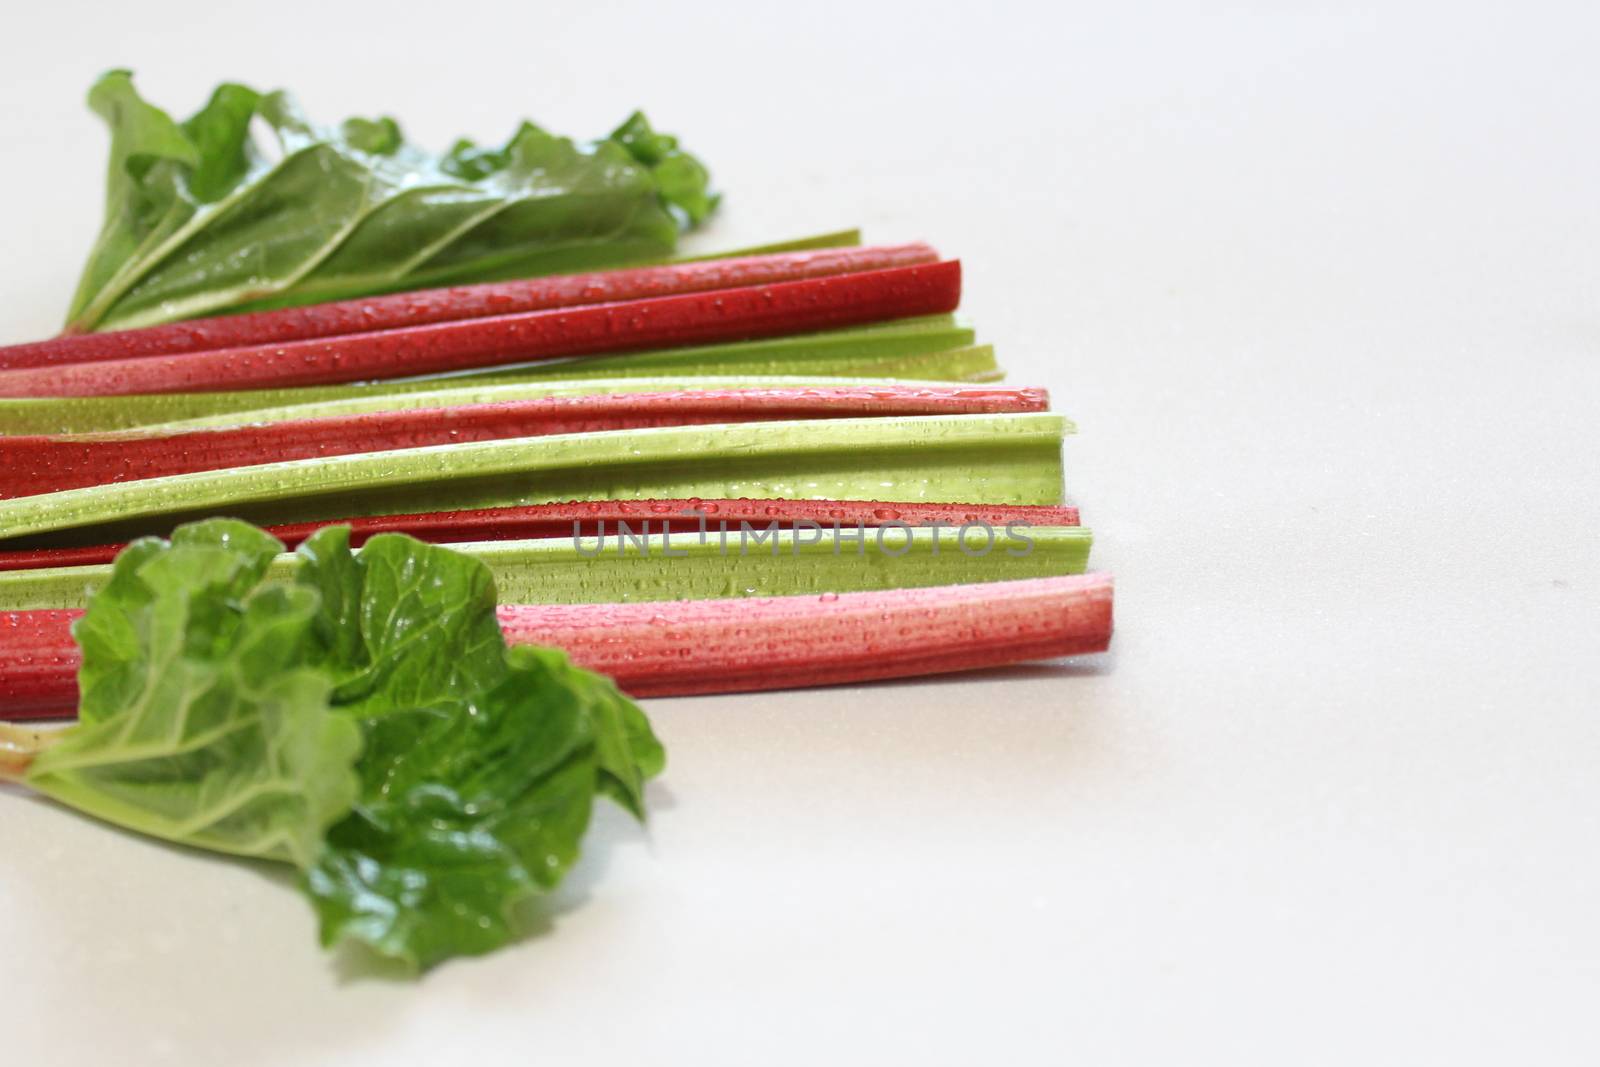 The picture shows colorful delicious rhubarb with leaves.